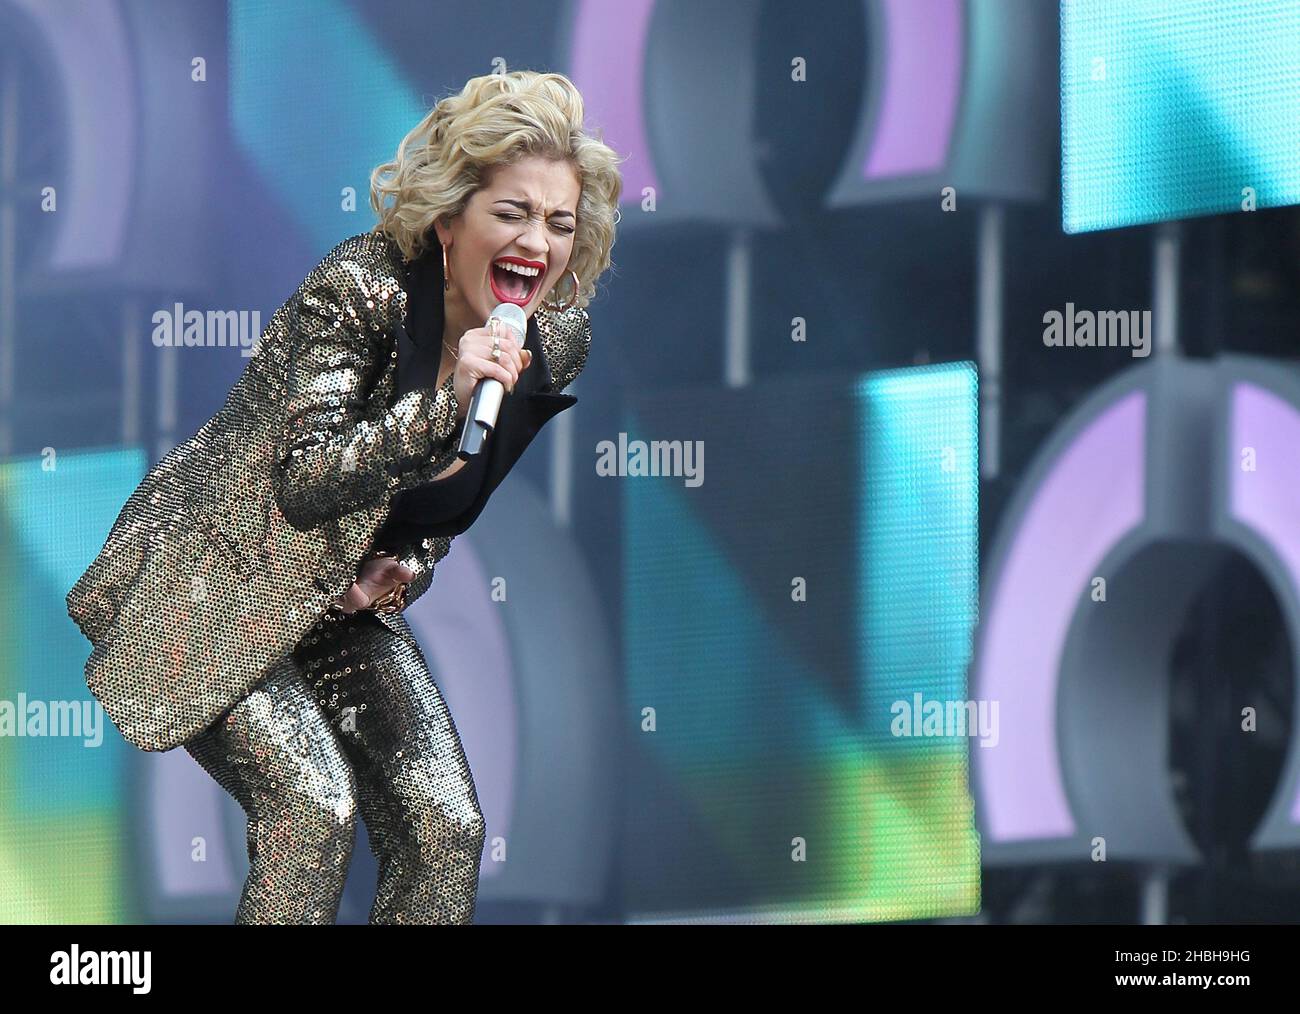 Rita Ora performs on stage at Sound of Change Live Concert at Chime for Change at Twickenham, London. Stock Photo